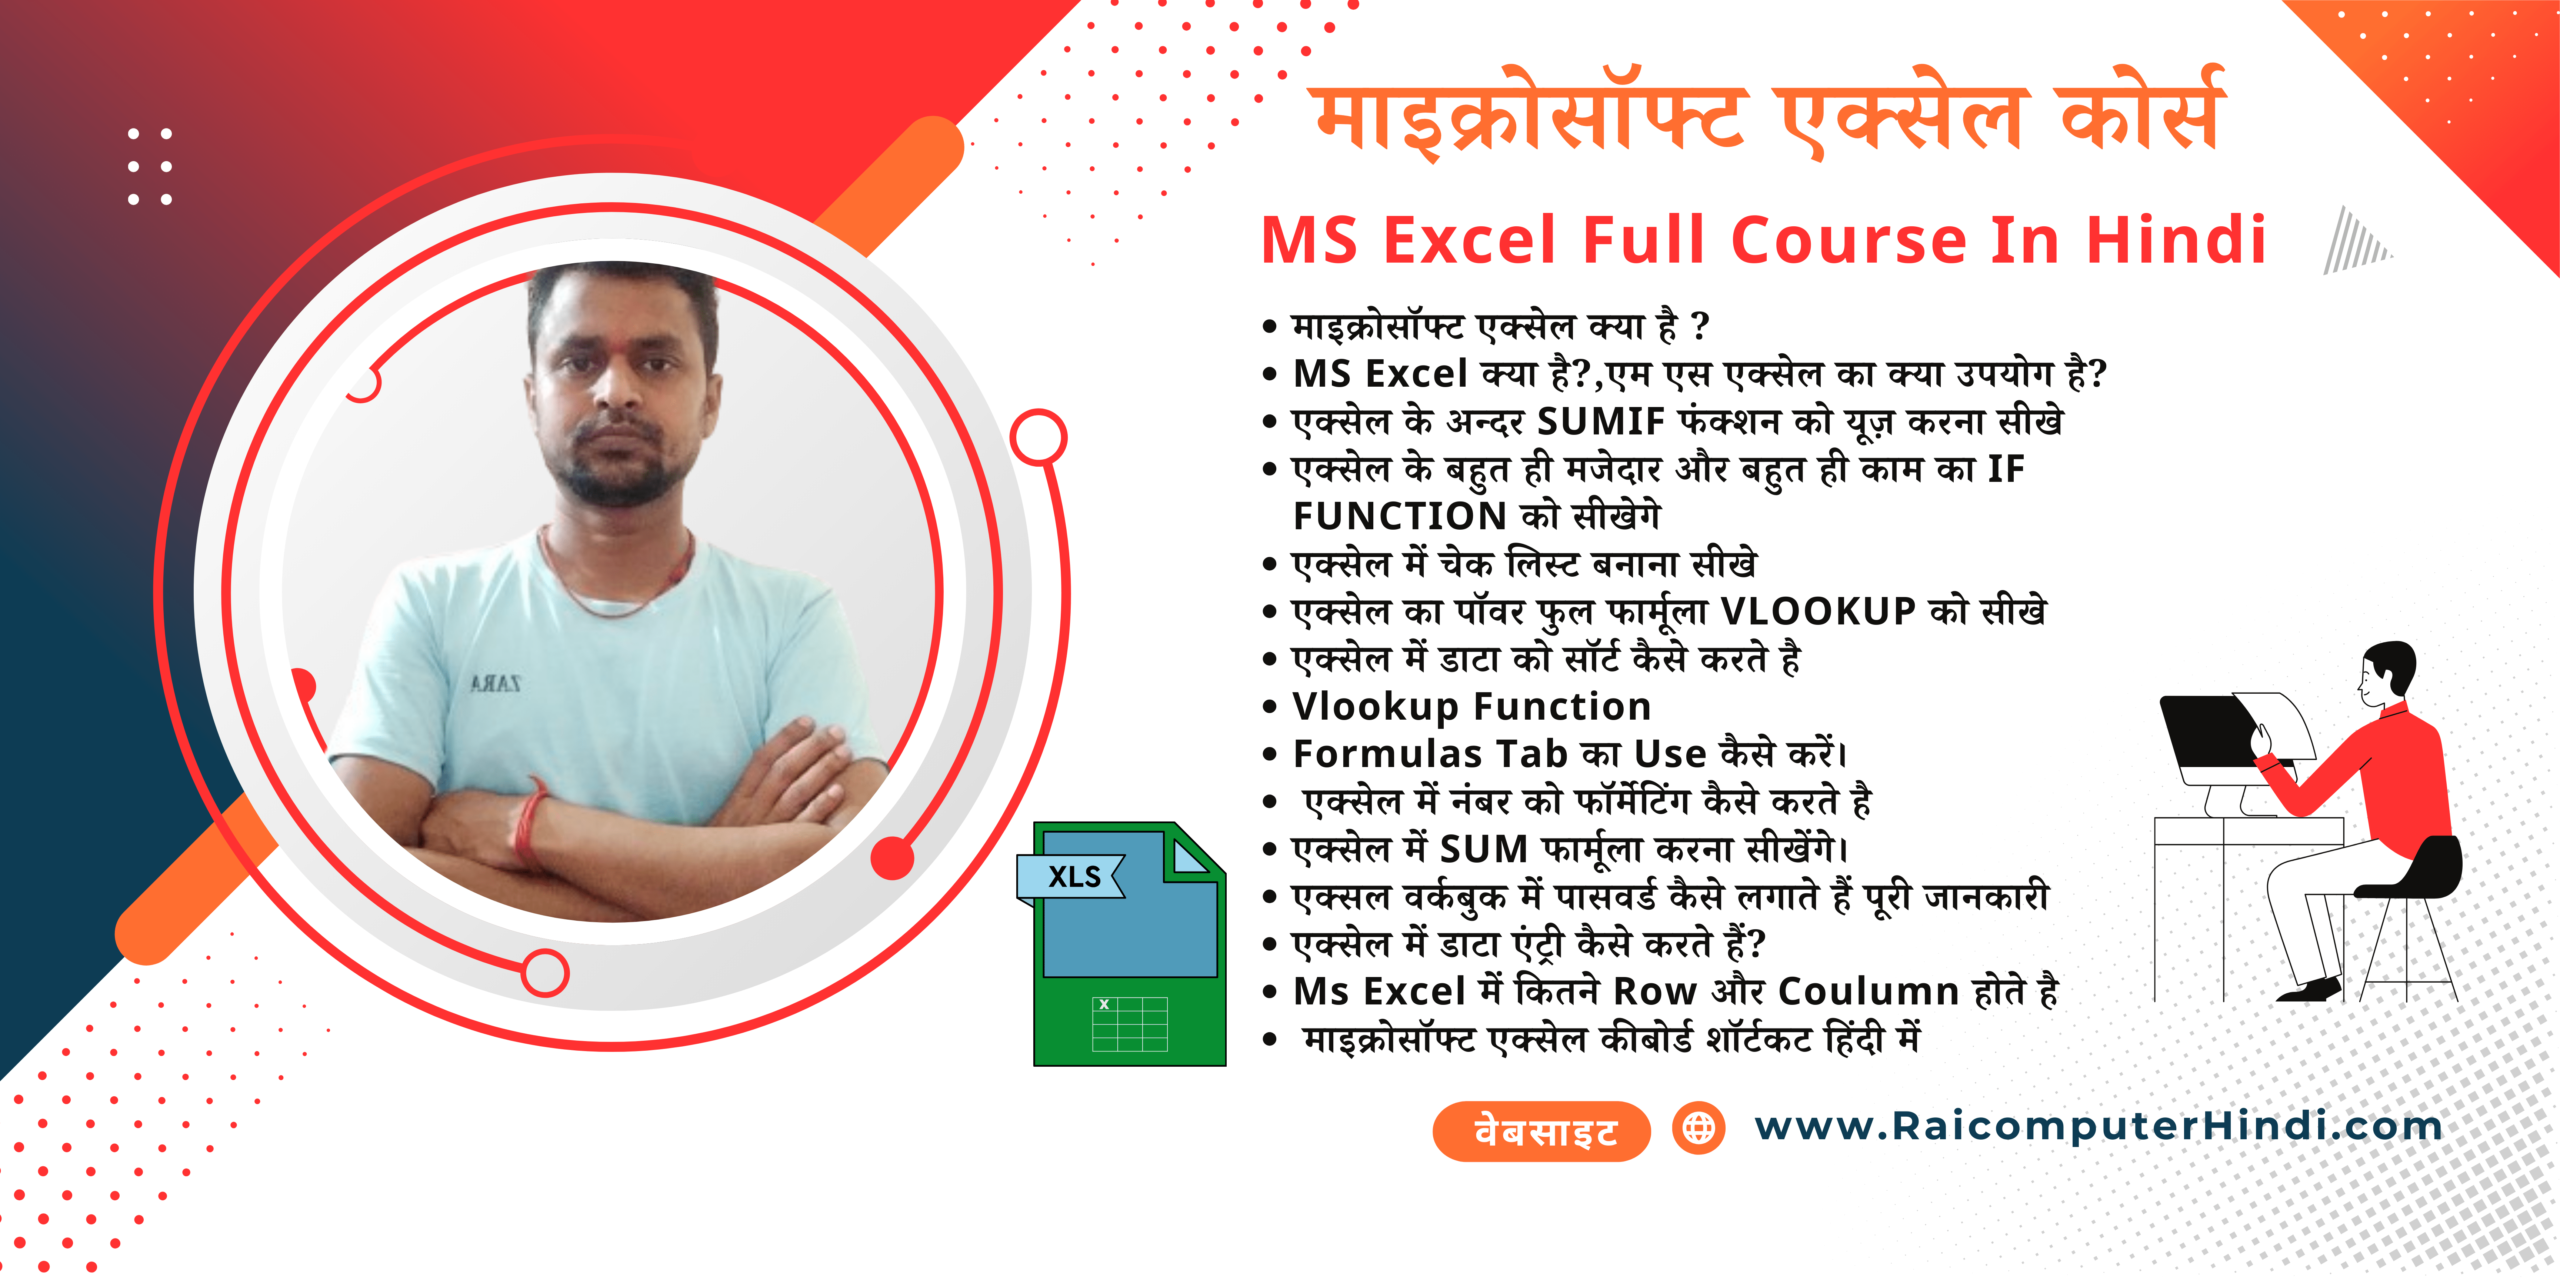 MS Excel Full Course In Hindi